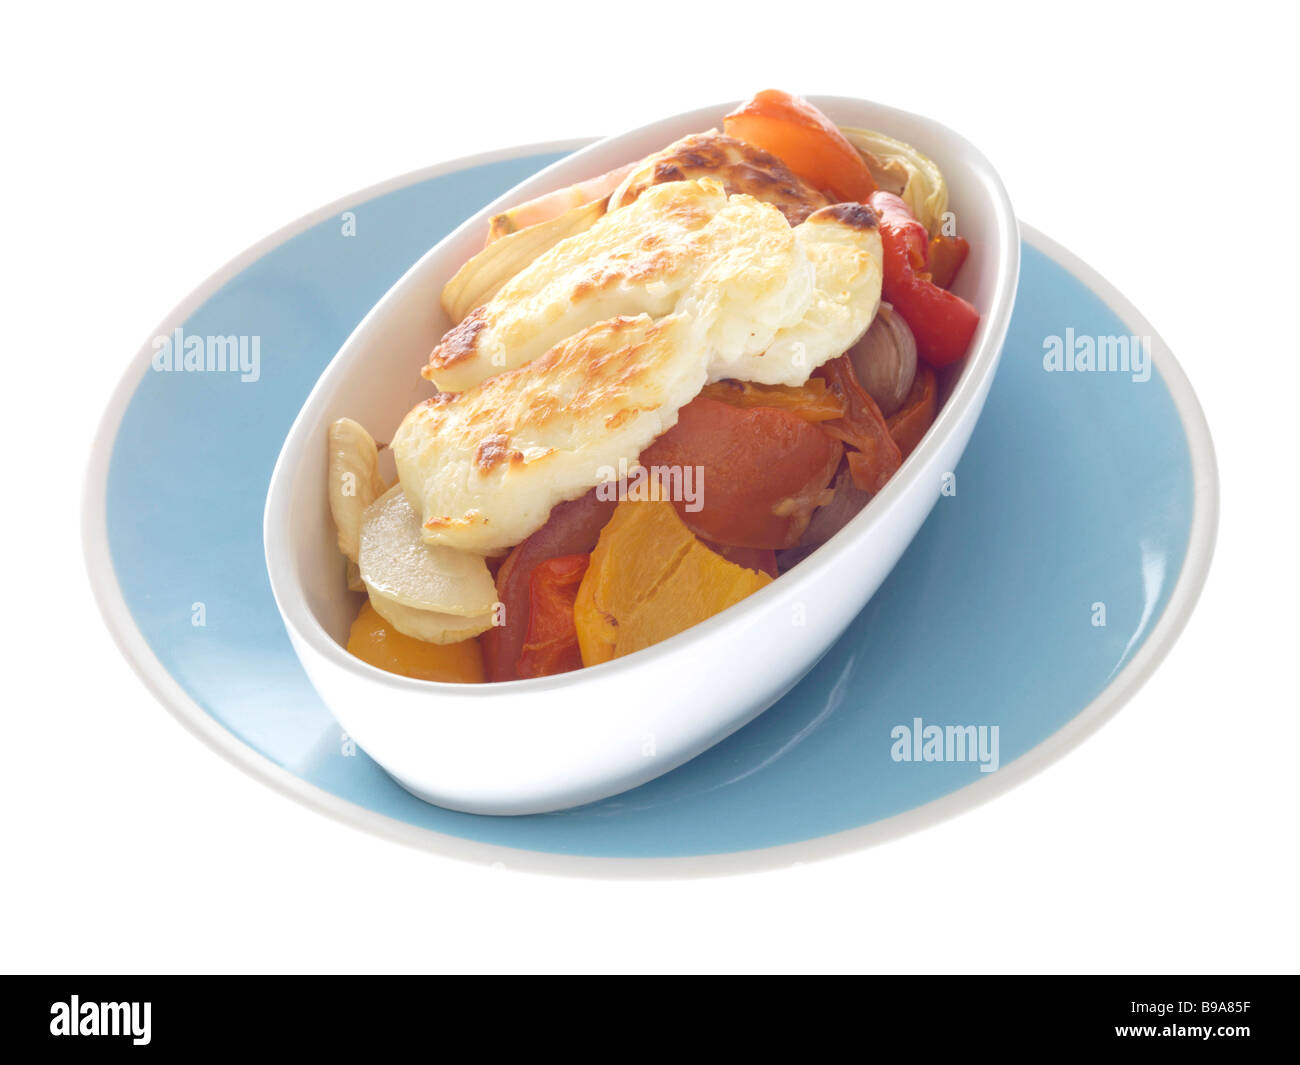 Roasted Vegetables with Halloumi Stock Photo